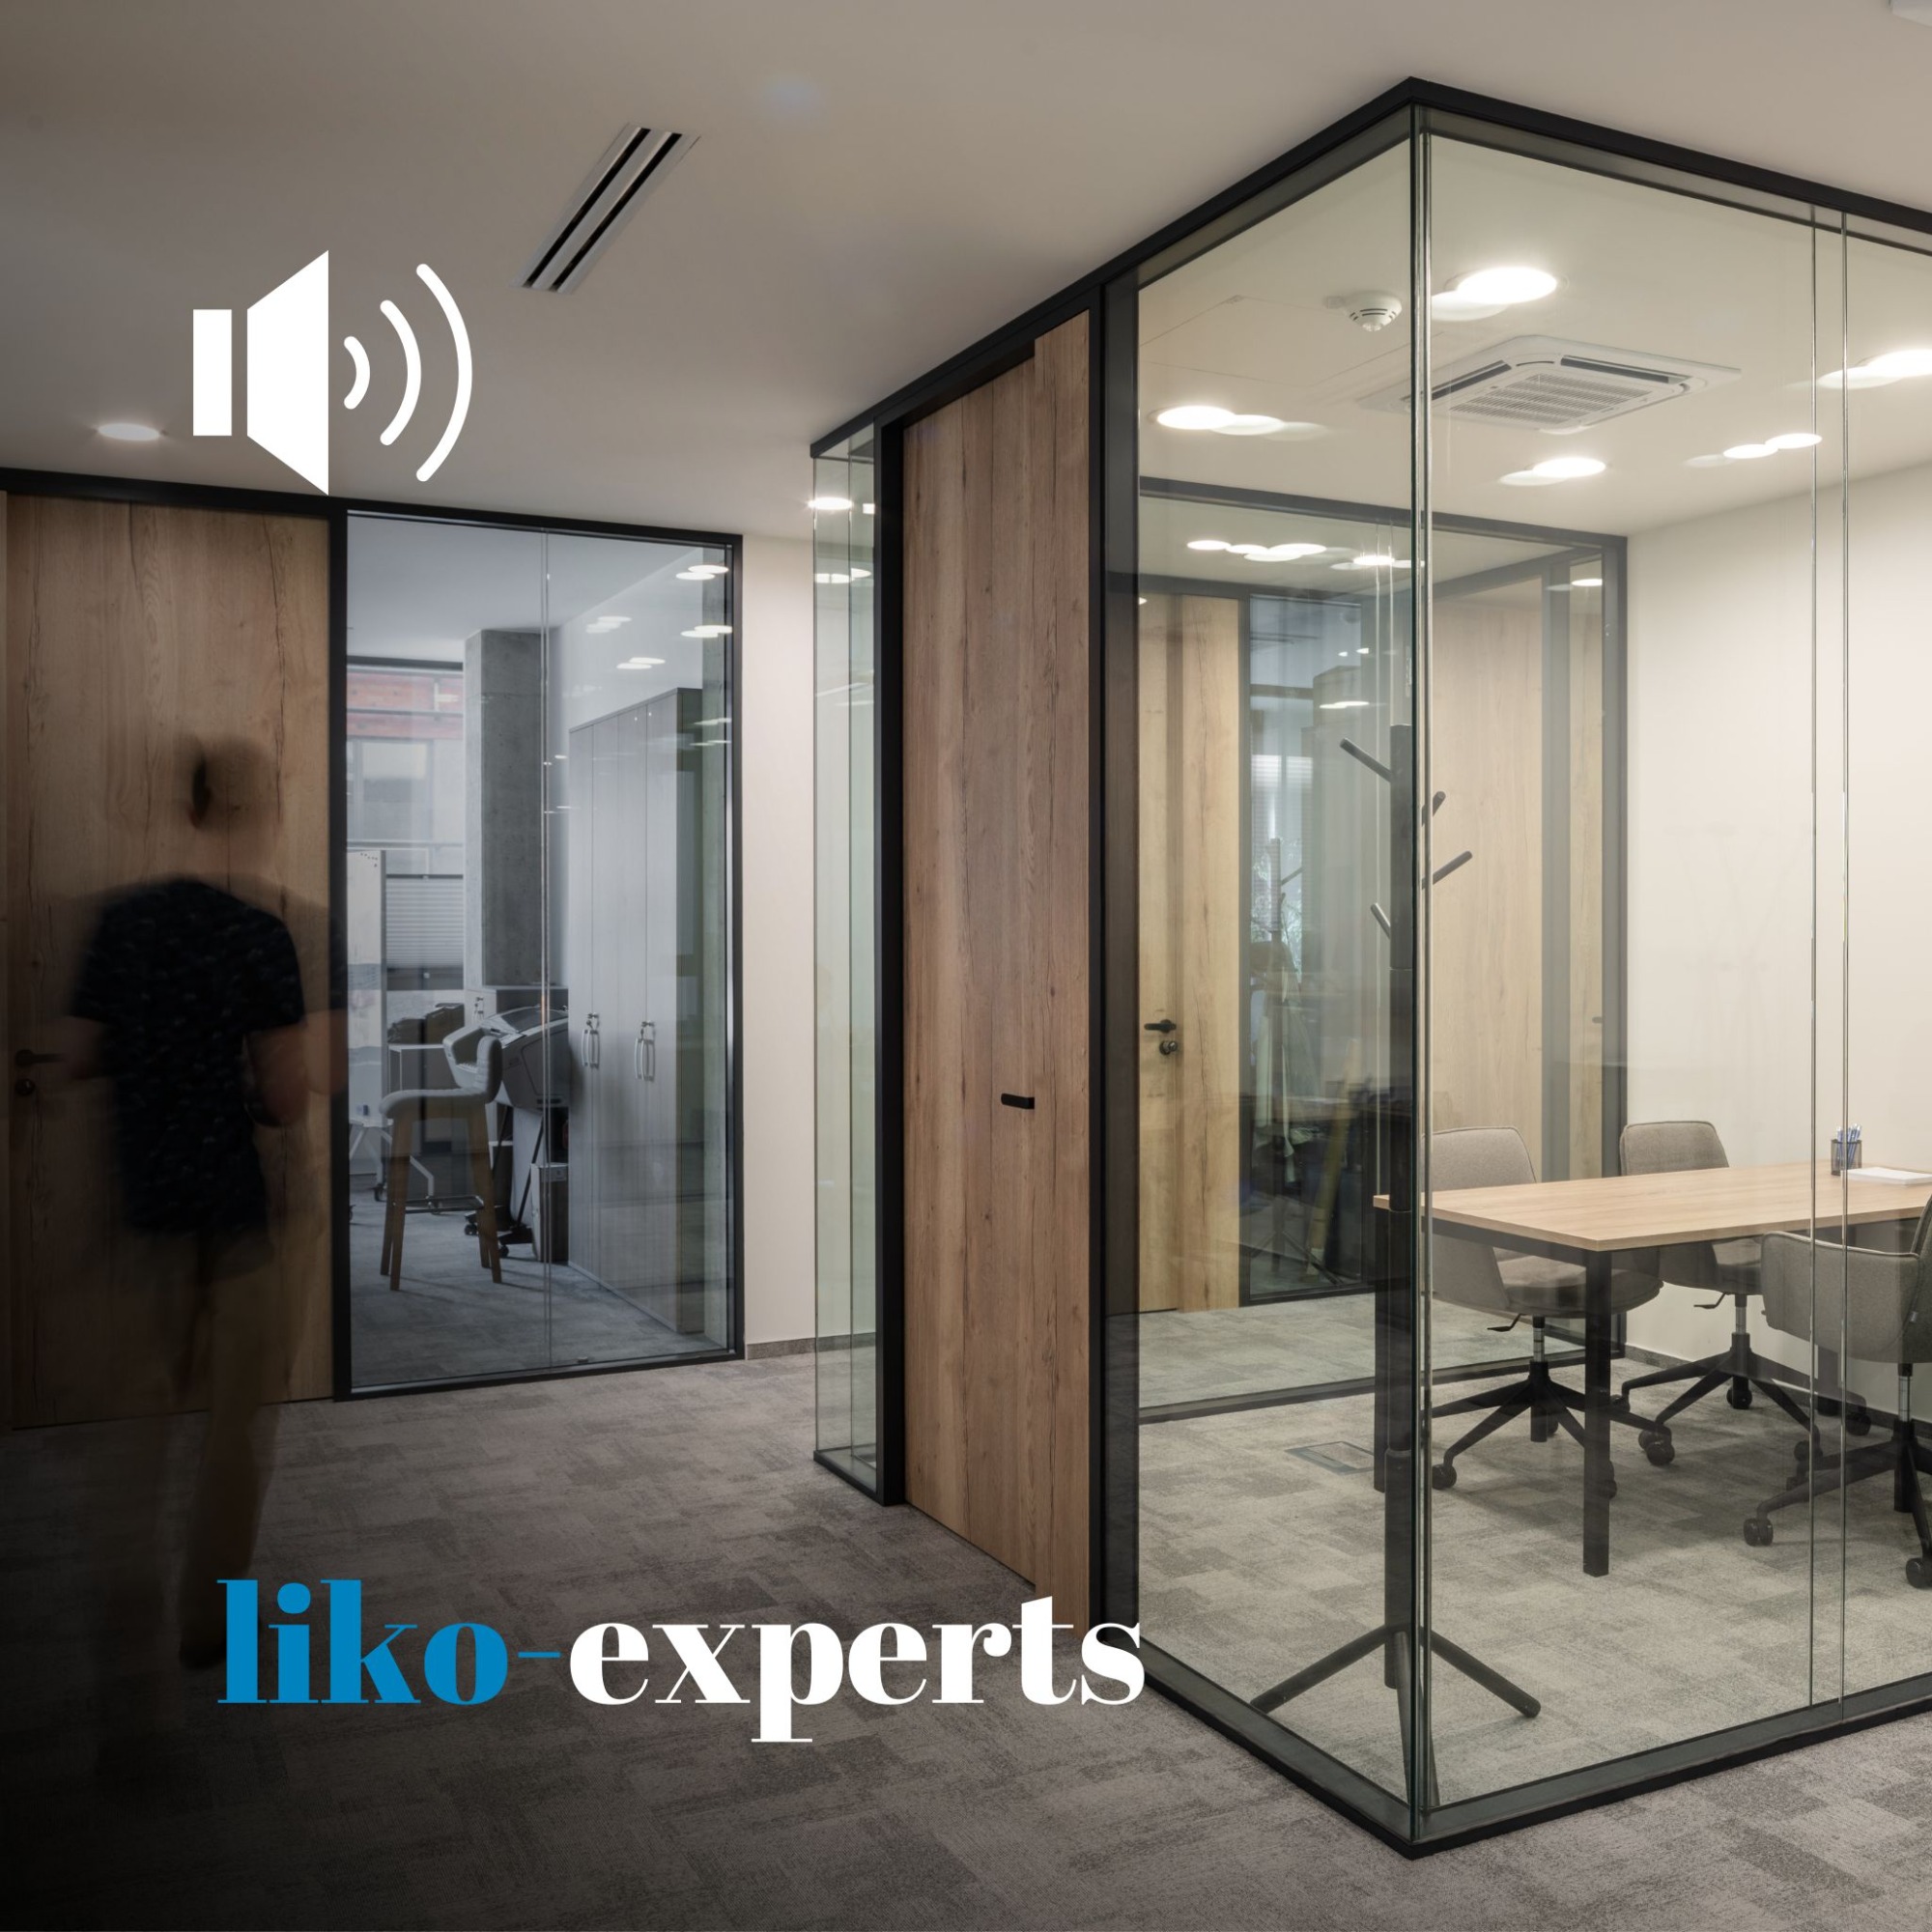 LIKO-Experts: Acoustics In Architecture